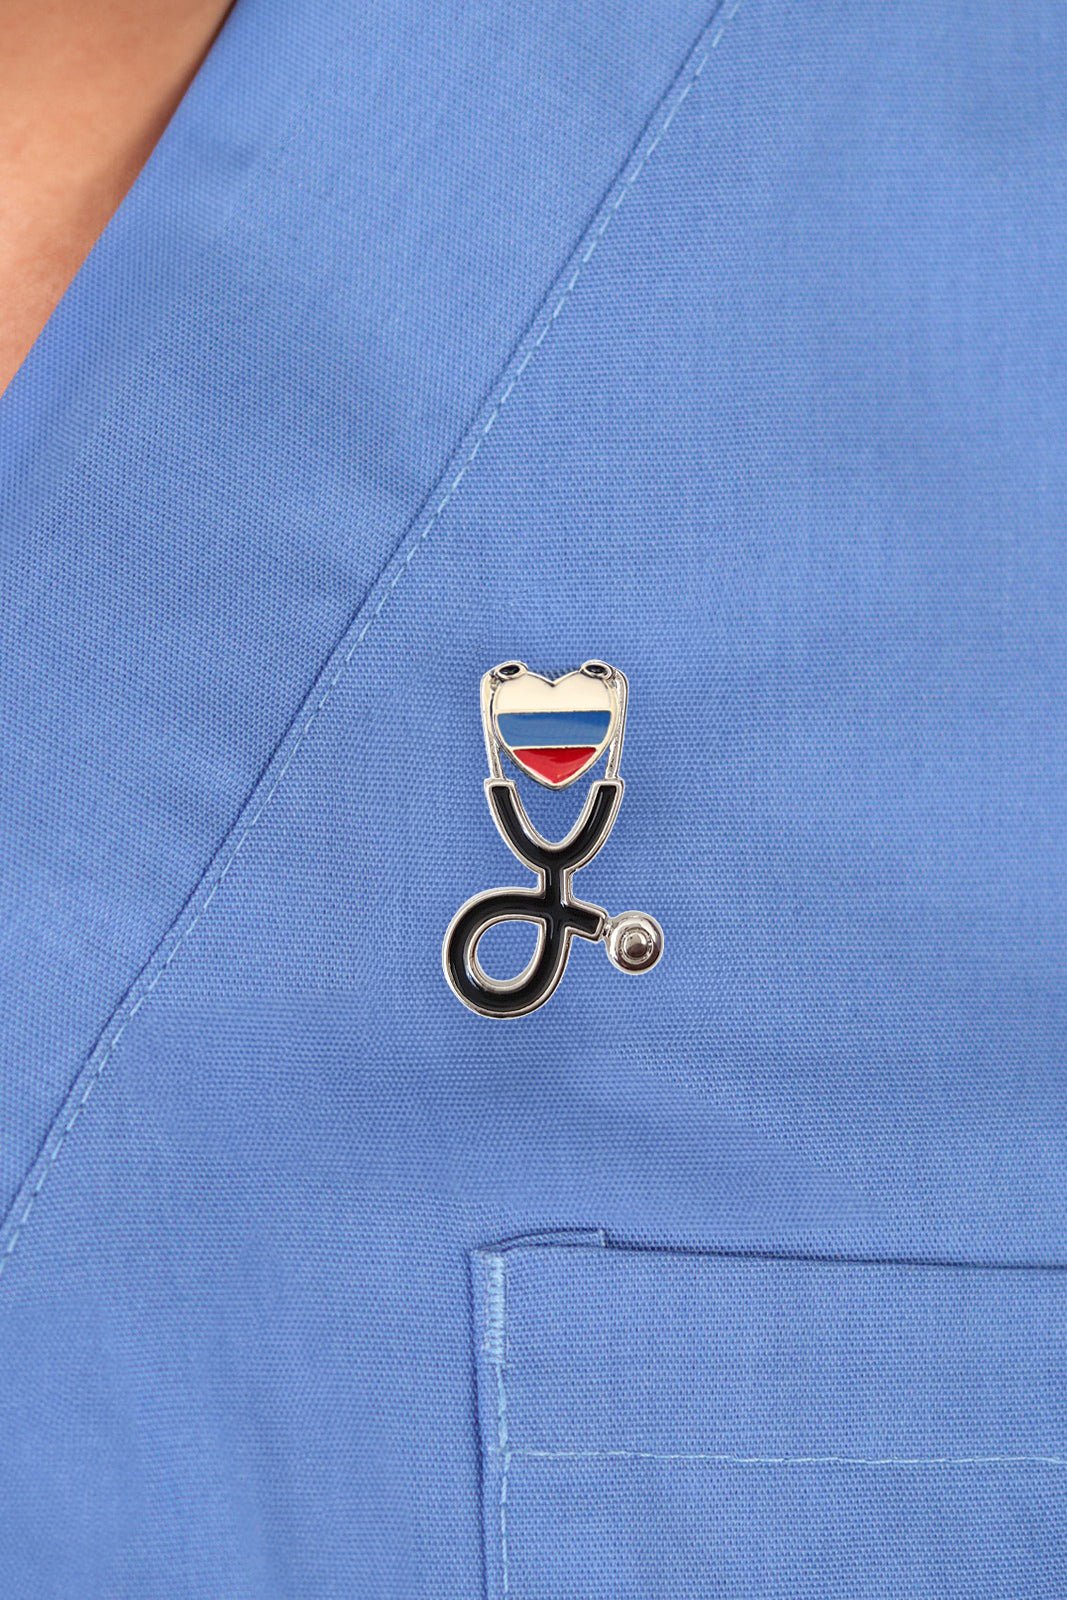 Russia Stethoscope flag pin